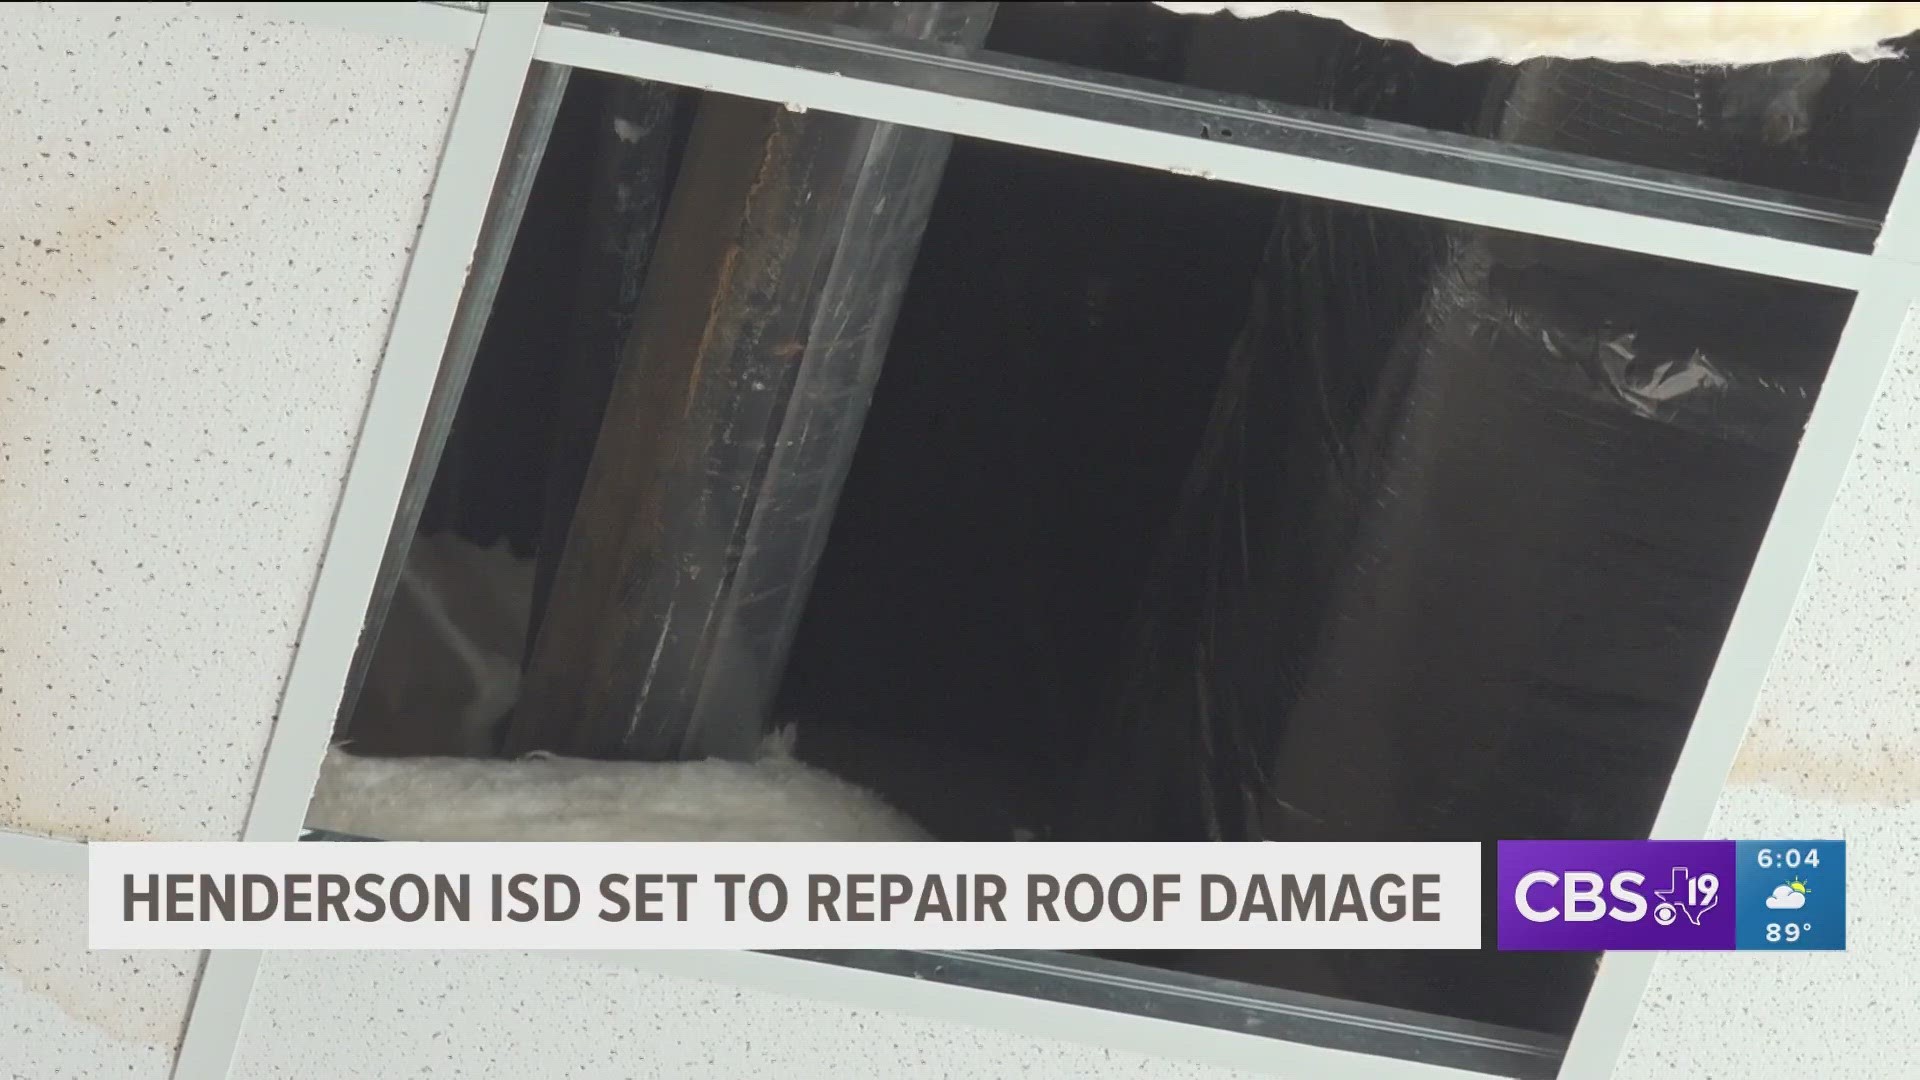 Henderson ISD approves funding to repair roof damage from hail storm at